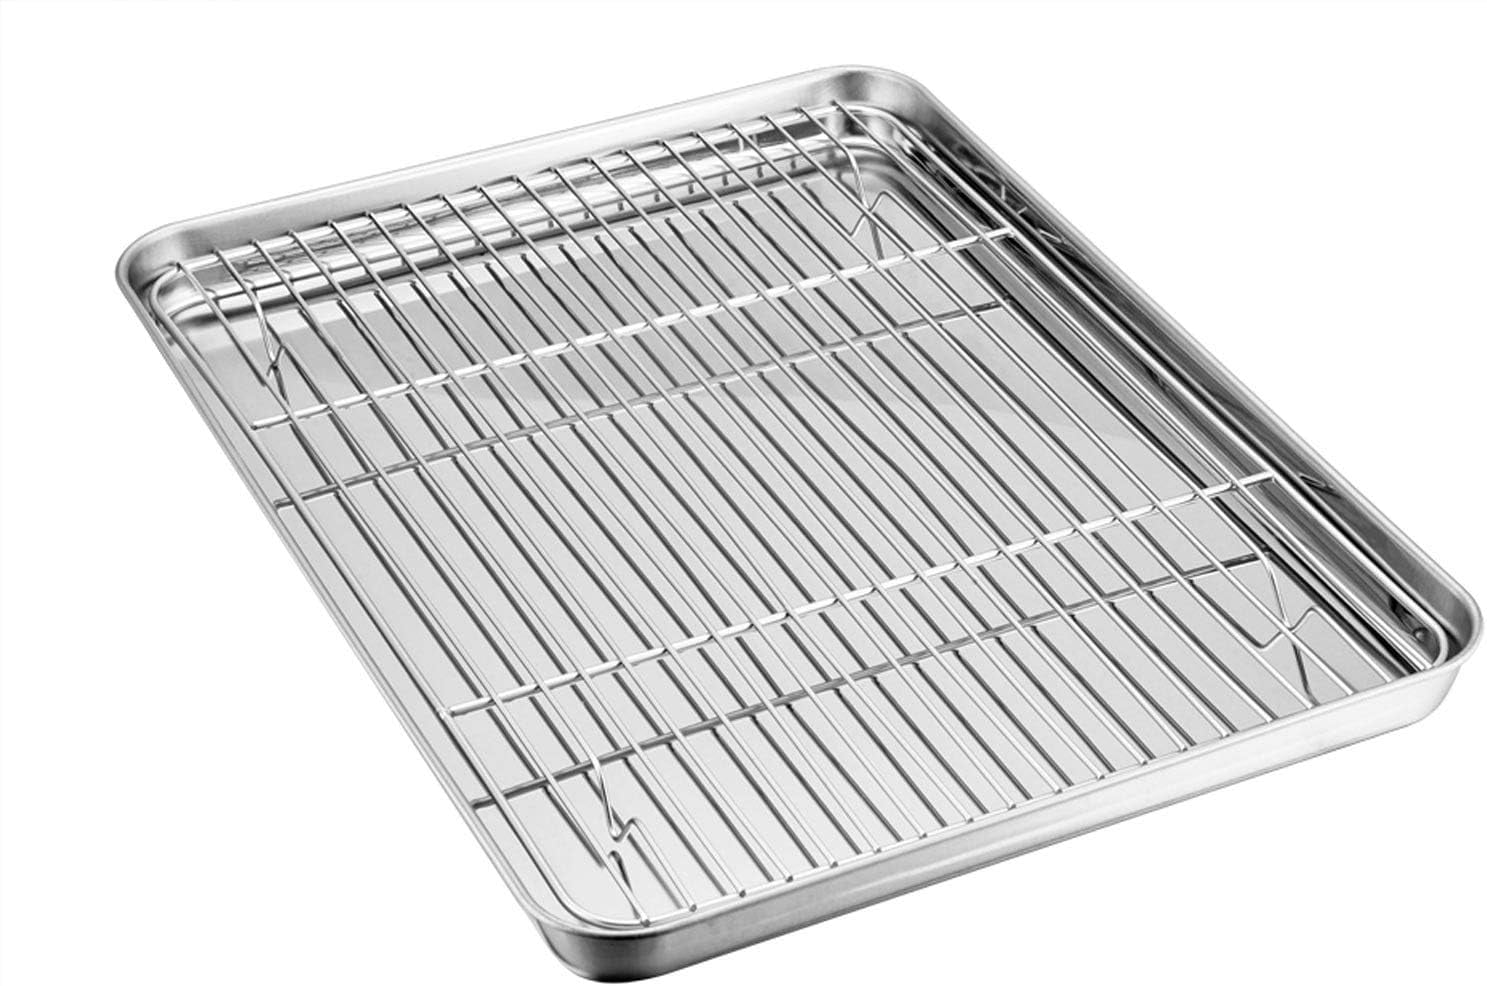  KITCHENATICS Heavy Duty Half Sheet Baking Pan with Rack Set, Cookie  Sheet for Oven, Rimmed Aluminum Tray w/Wire Cooling Rack for Cooking &  Roasting, Half Sheet Pan with Baking Rack 13.1